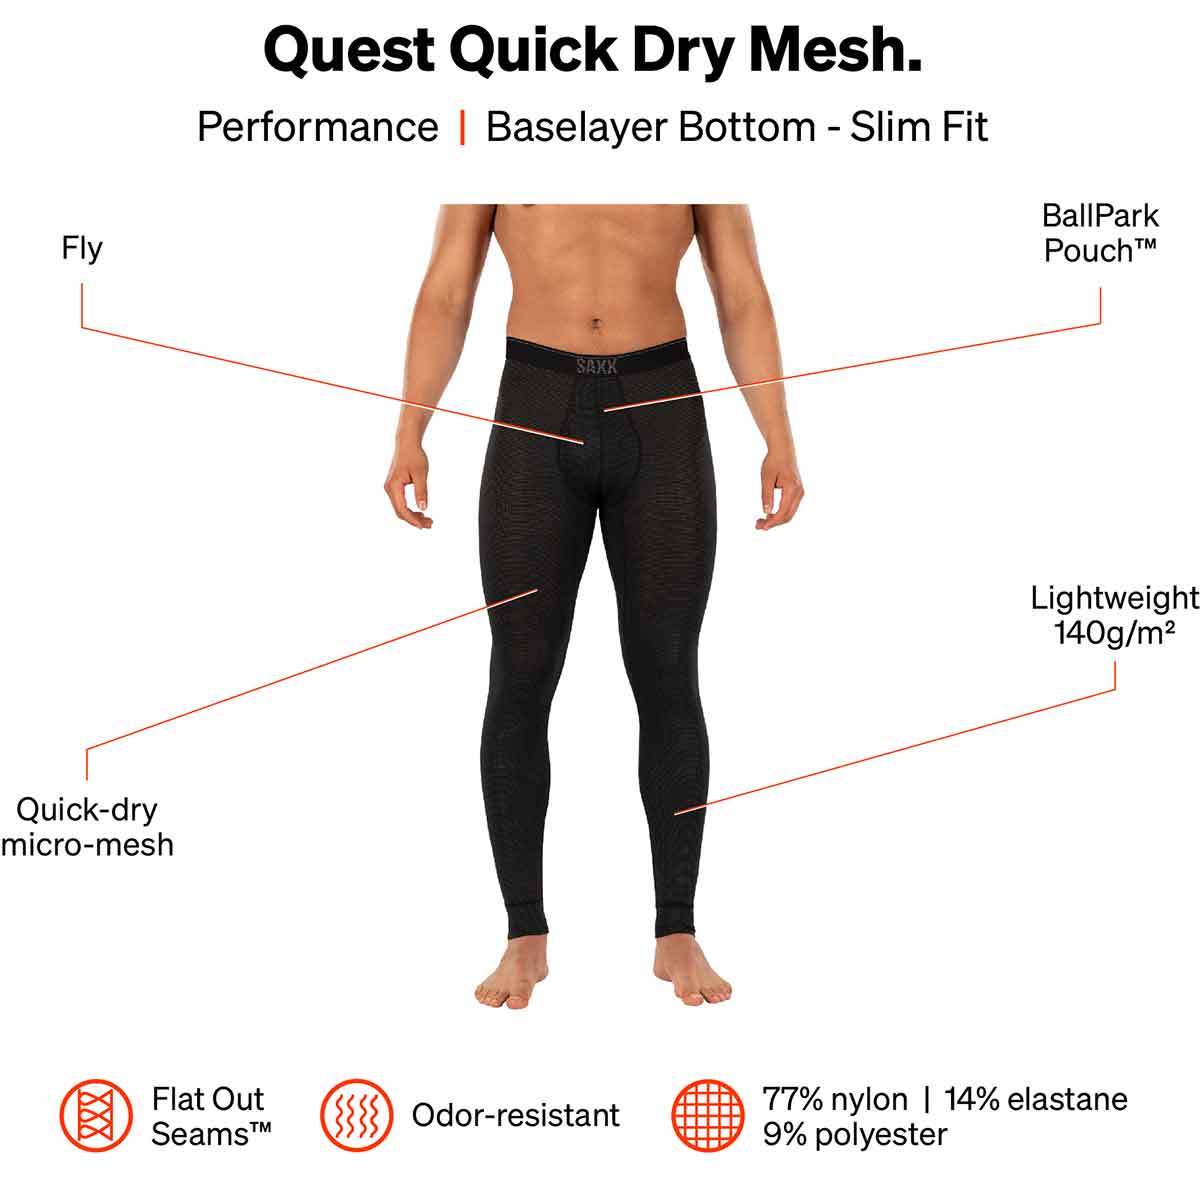 SAXX Quest Quick Dry Mesh Tights | Men's Overview